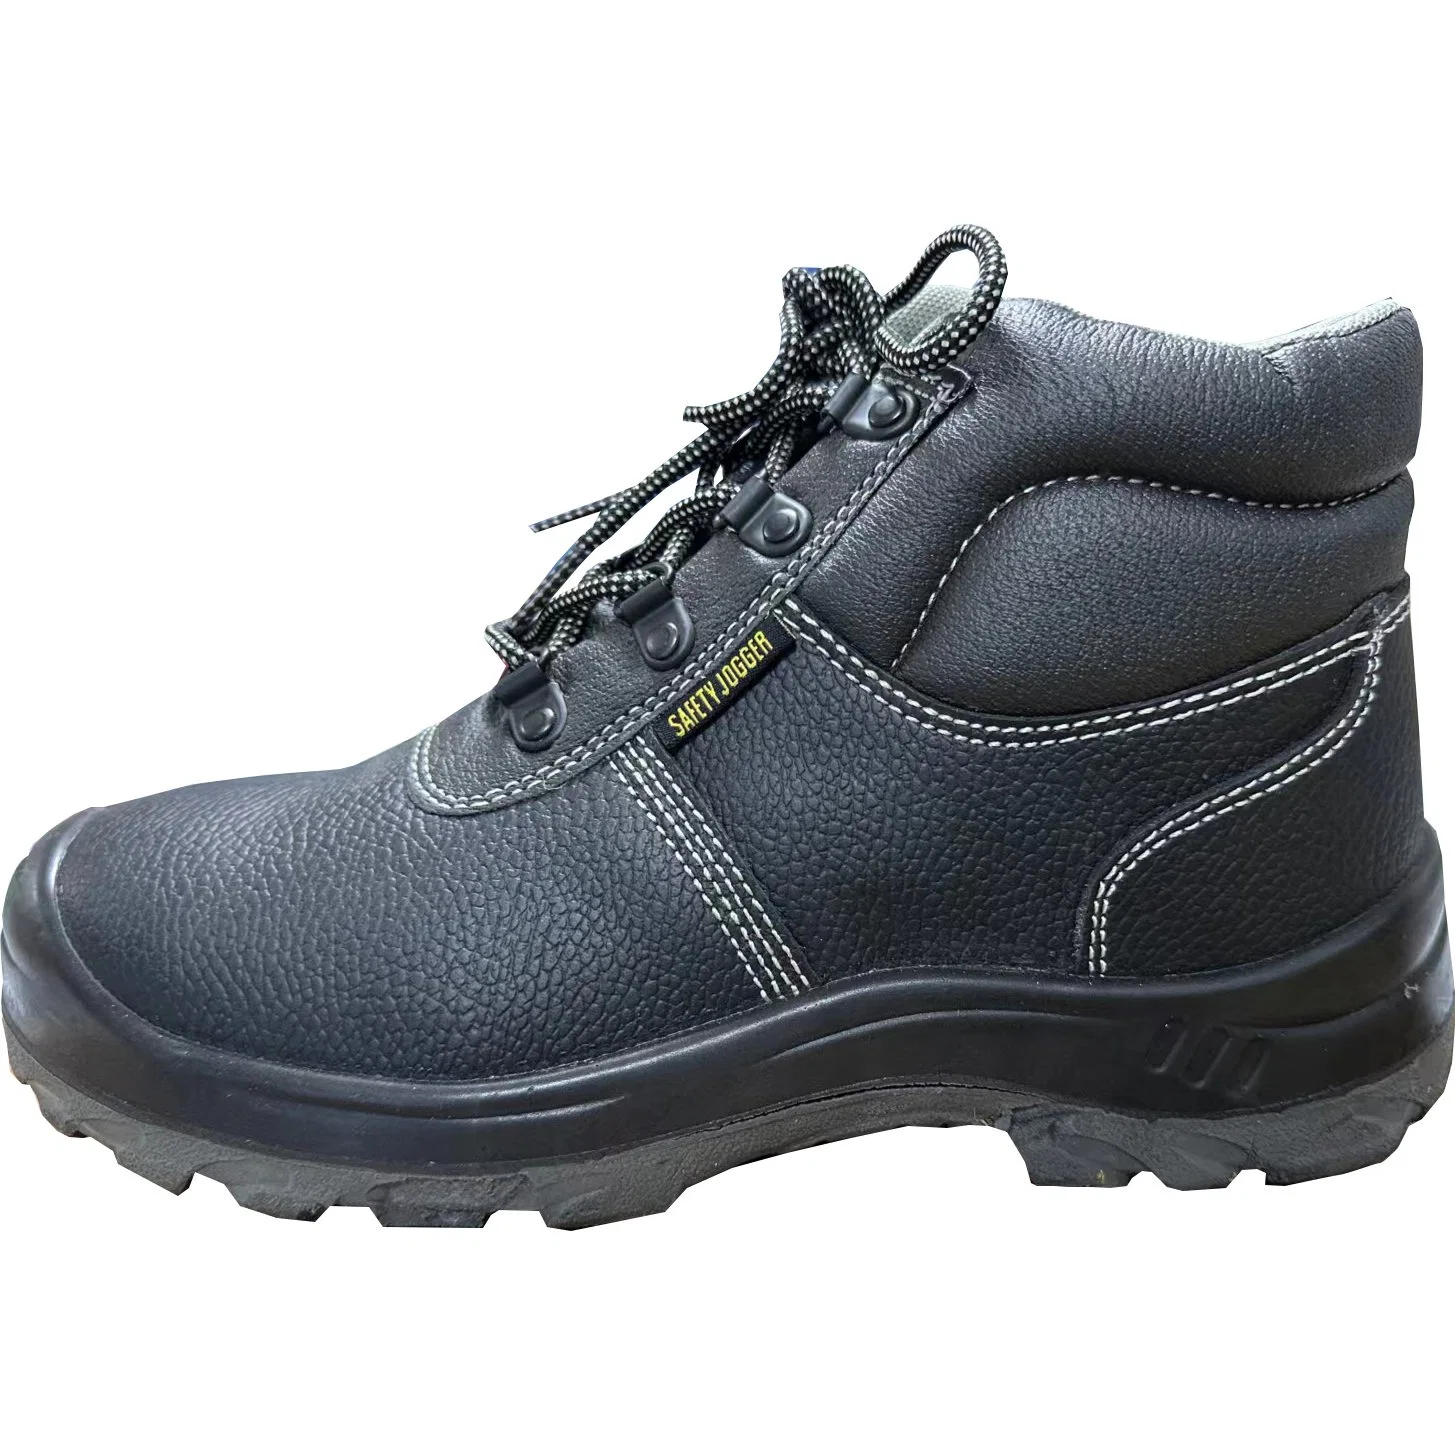 SLS-Gk007 PU Injection Molding Buffalo Leather Safety Shoes for Men